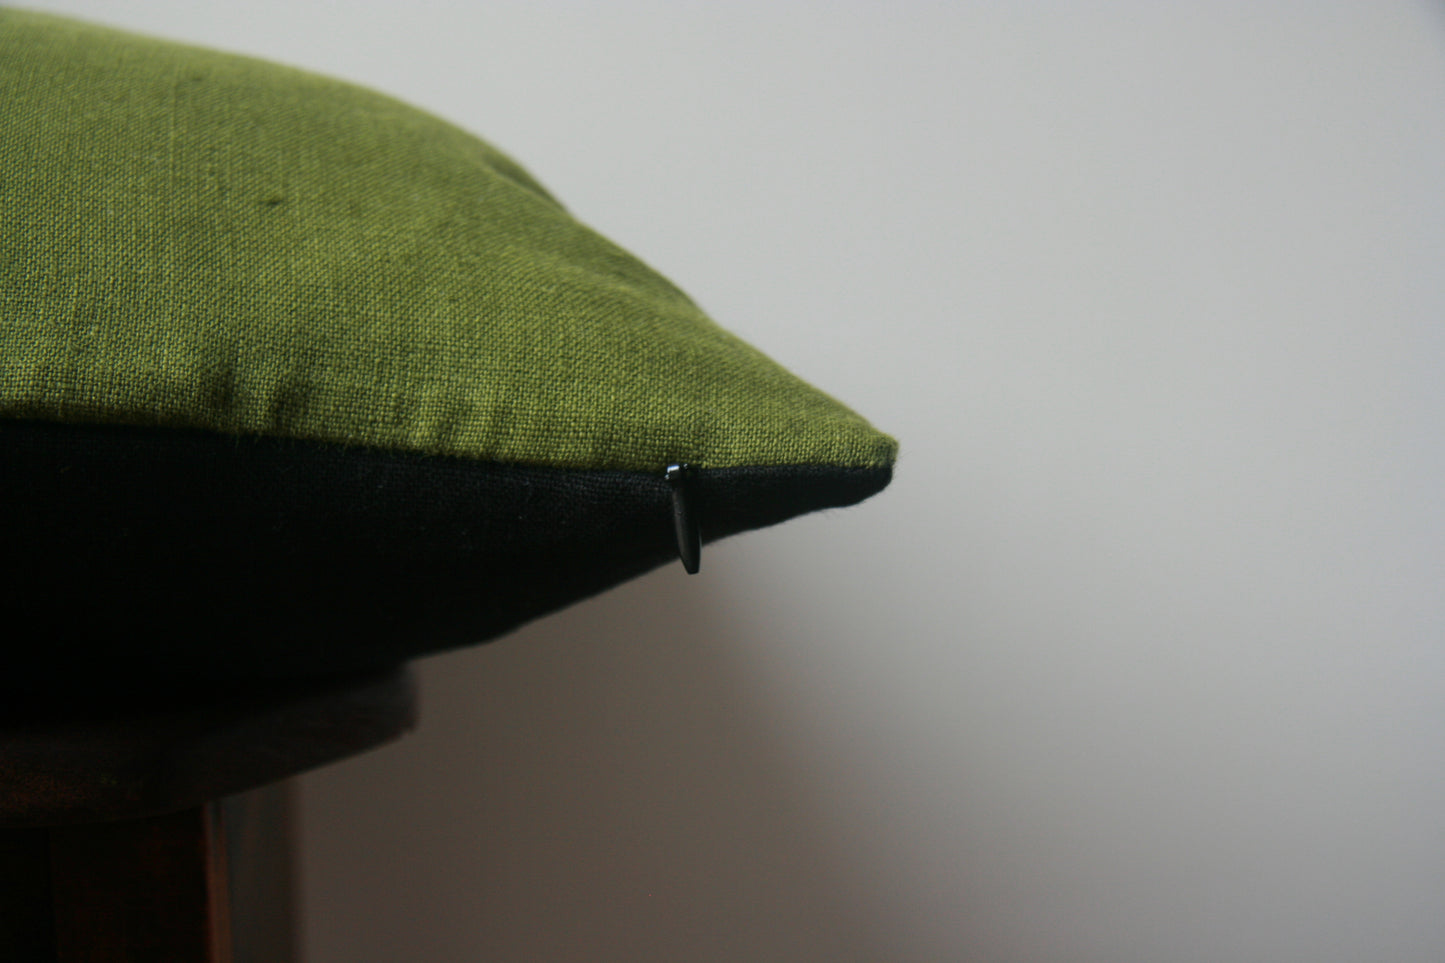 Side profile of cushion cover. Green on top side, black on bottom side. Concealed zip with black zipper pull just visible